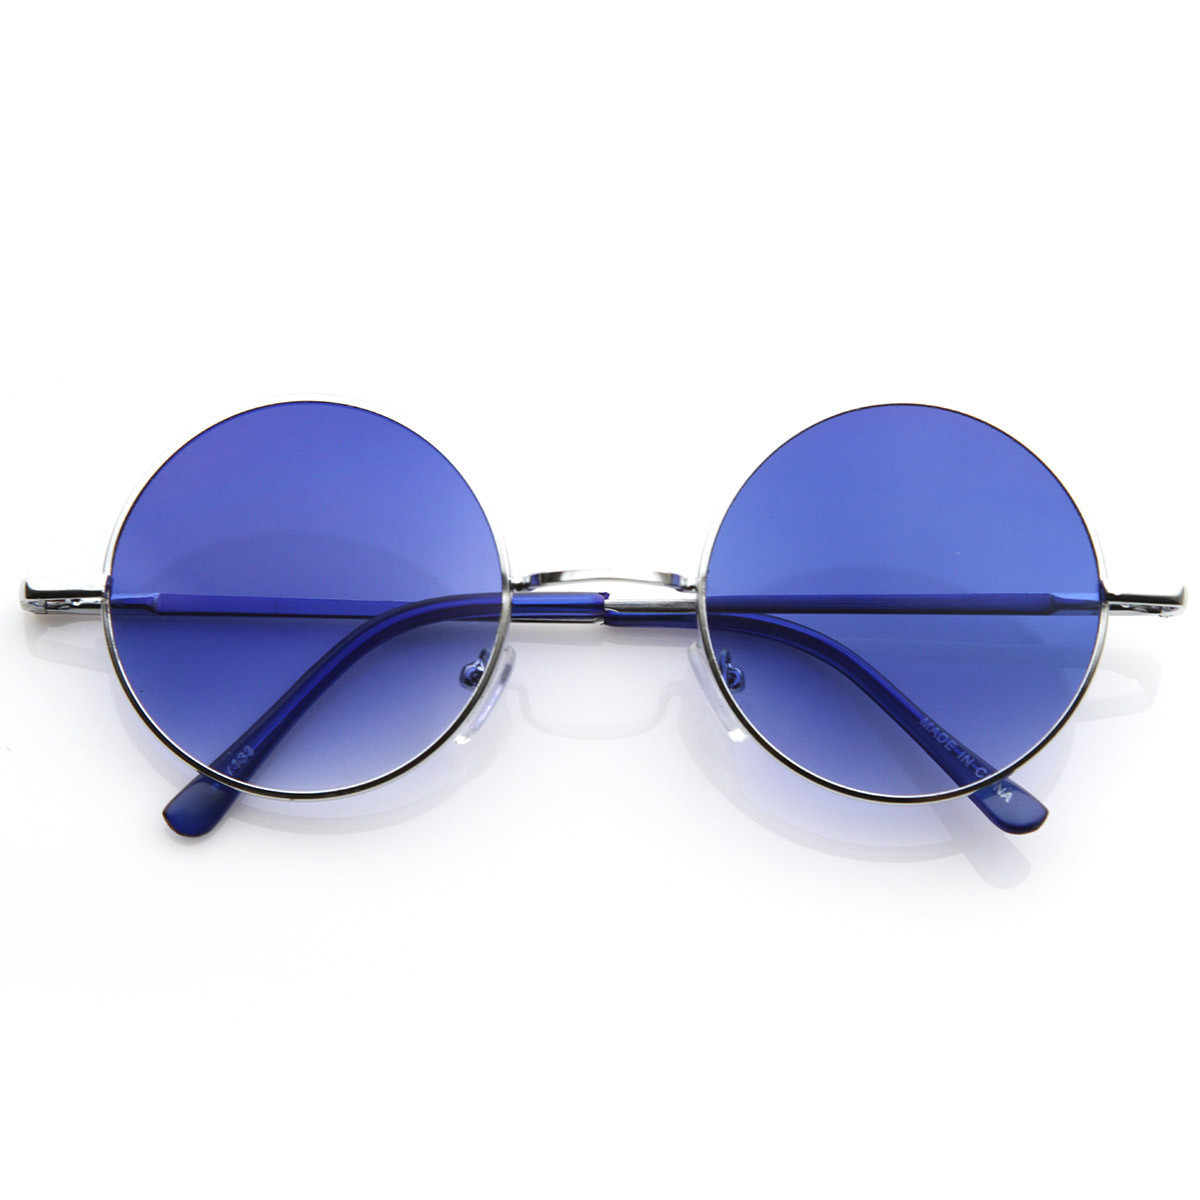 Lennon Style Round Circle Metal Sunglasses W/ Color Lens Tint - 8594 - Silver Blue